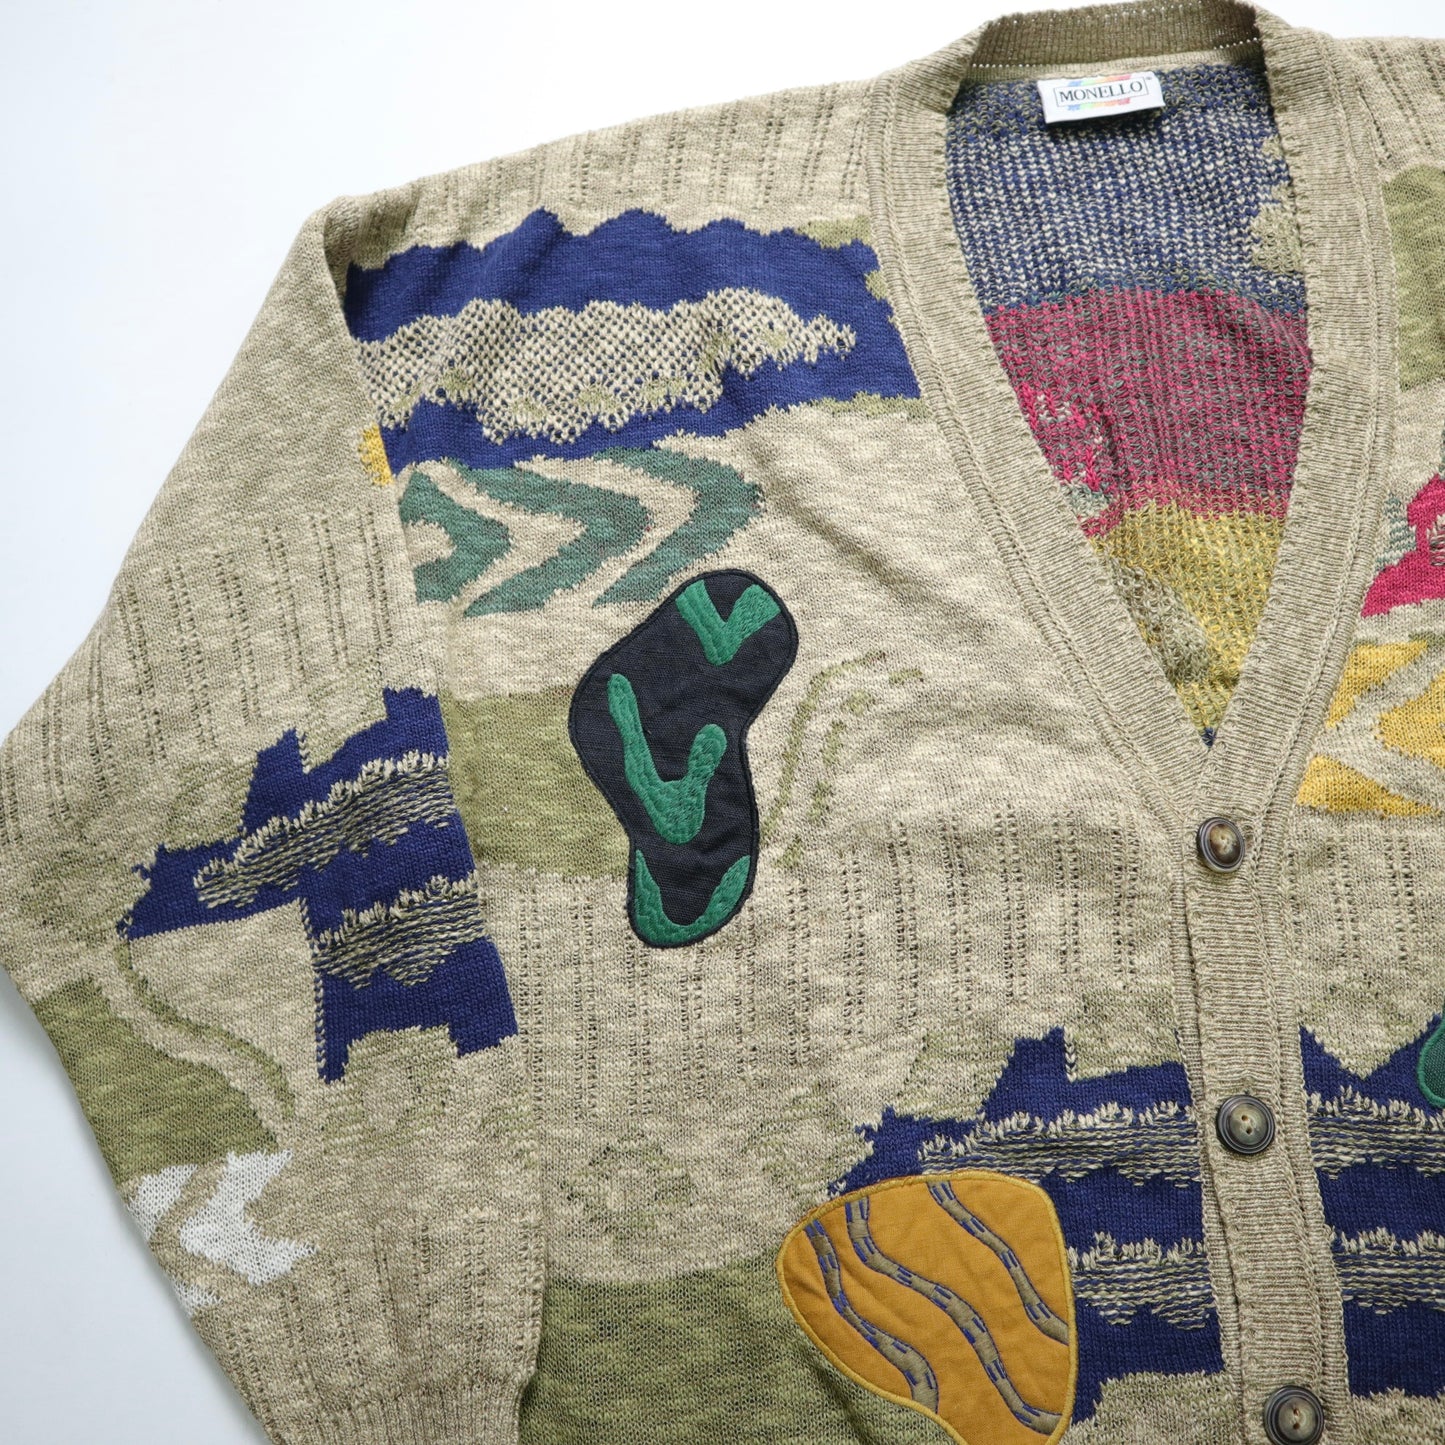 90s Italian-made acrylic patchwork knitted jacket vintage sweater